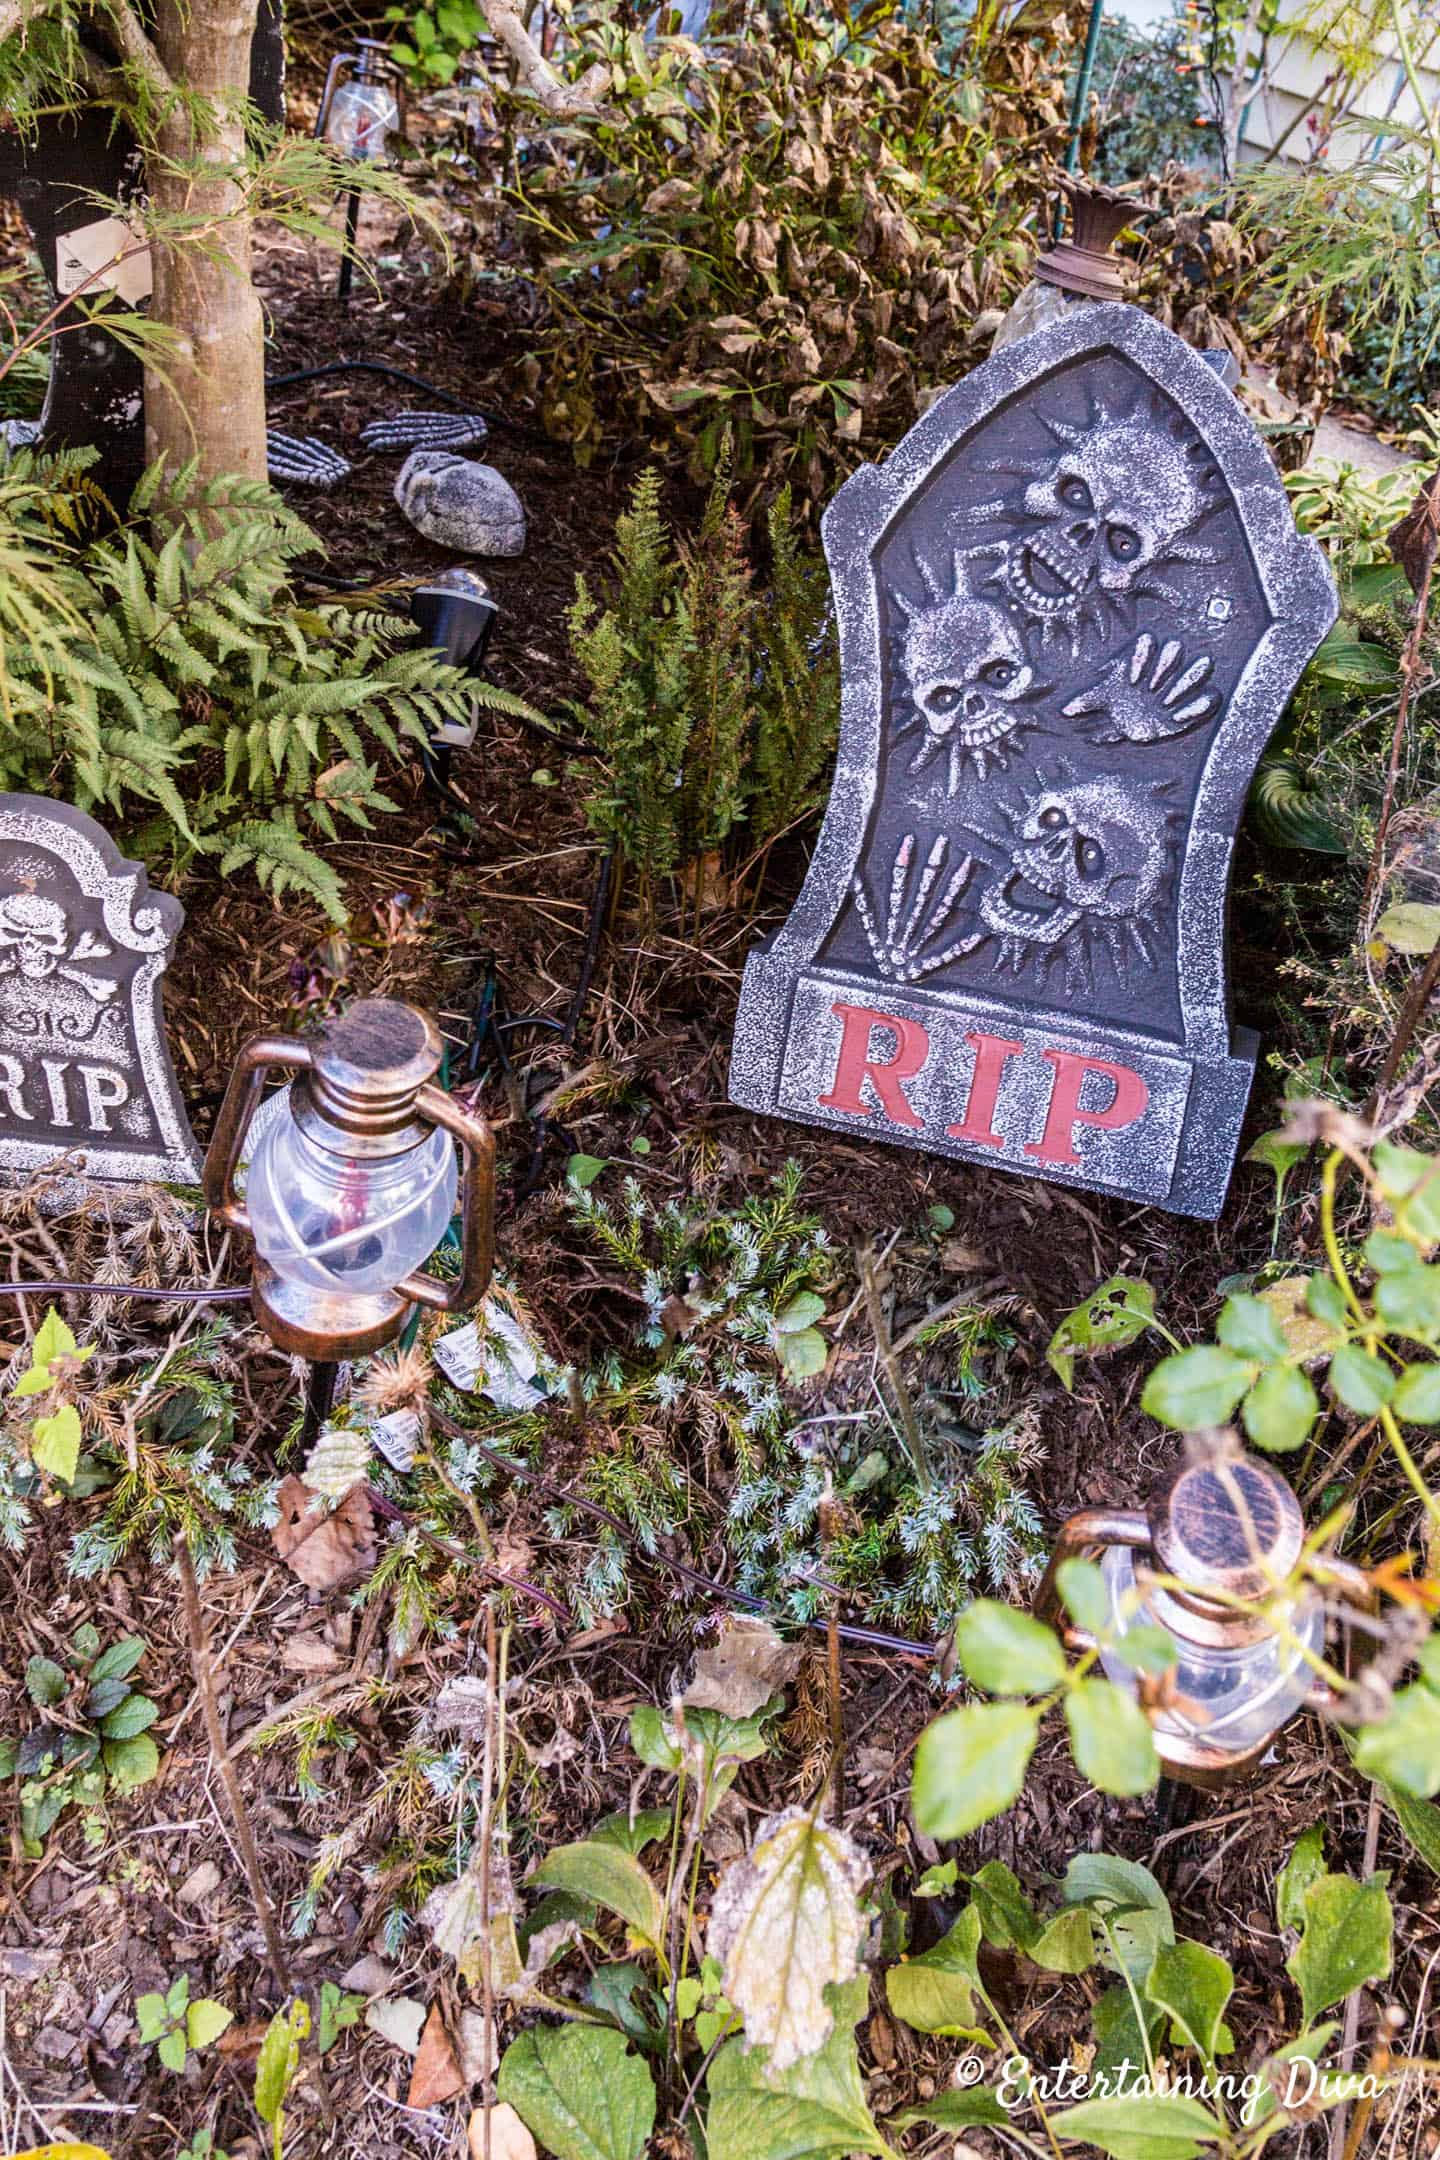 Halloween graveyard with gravestones during the day